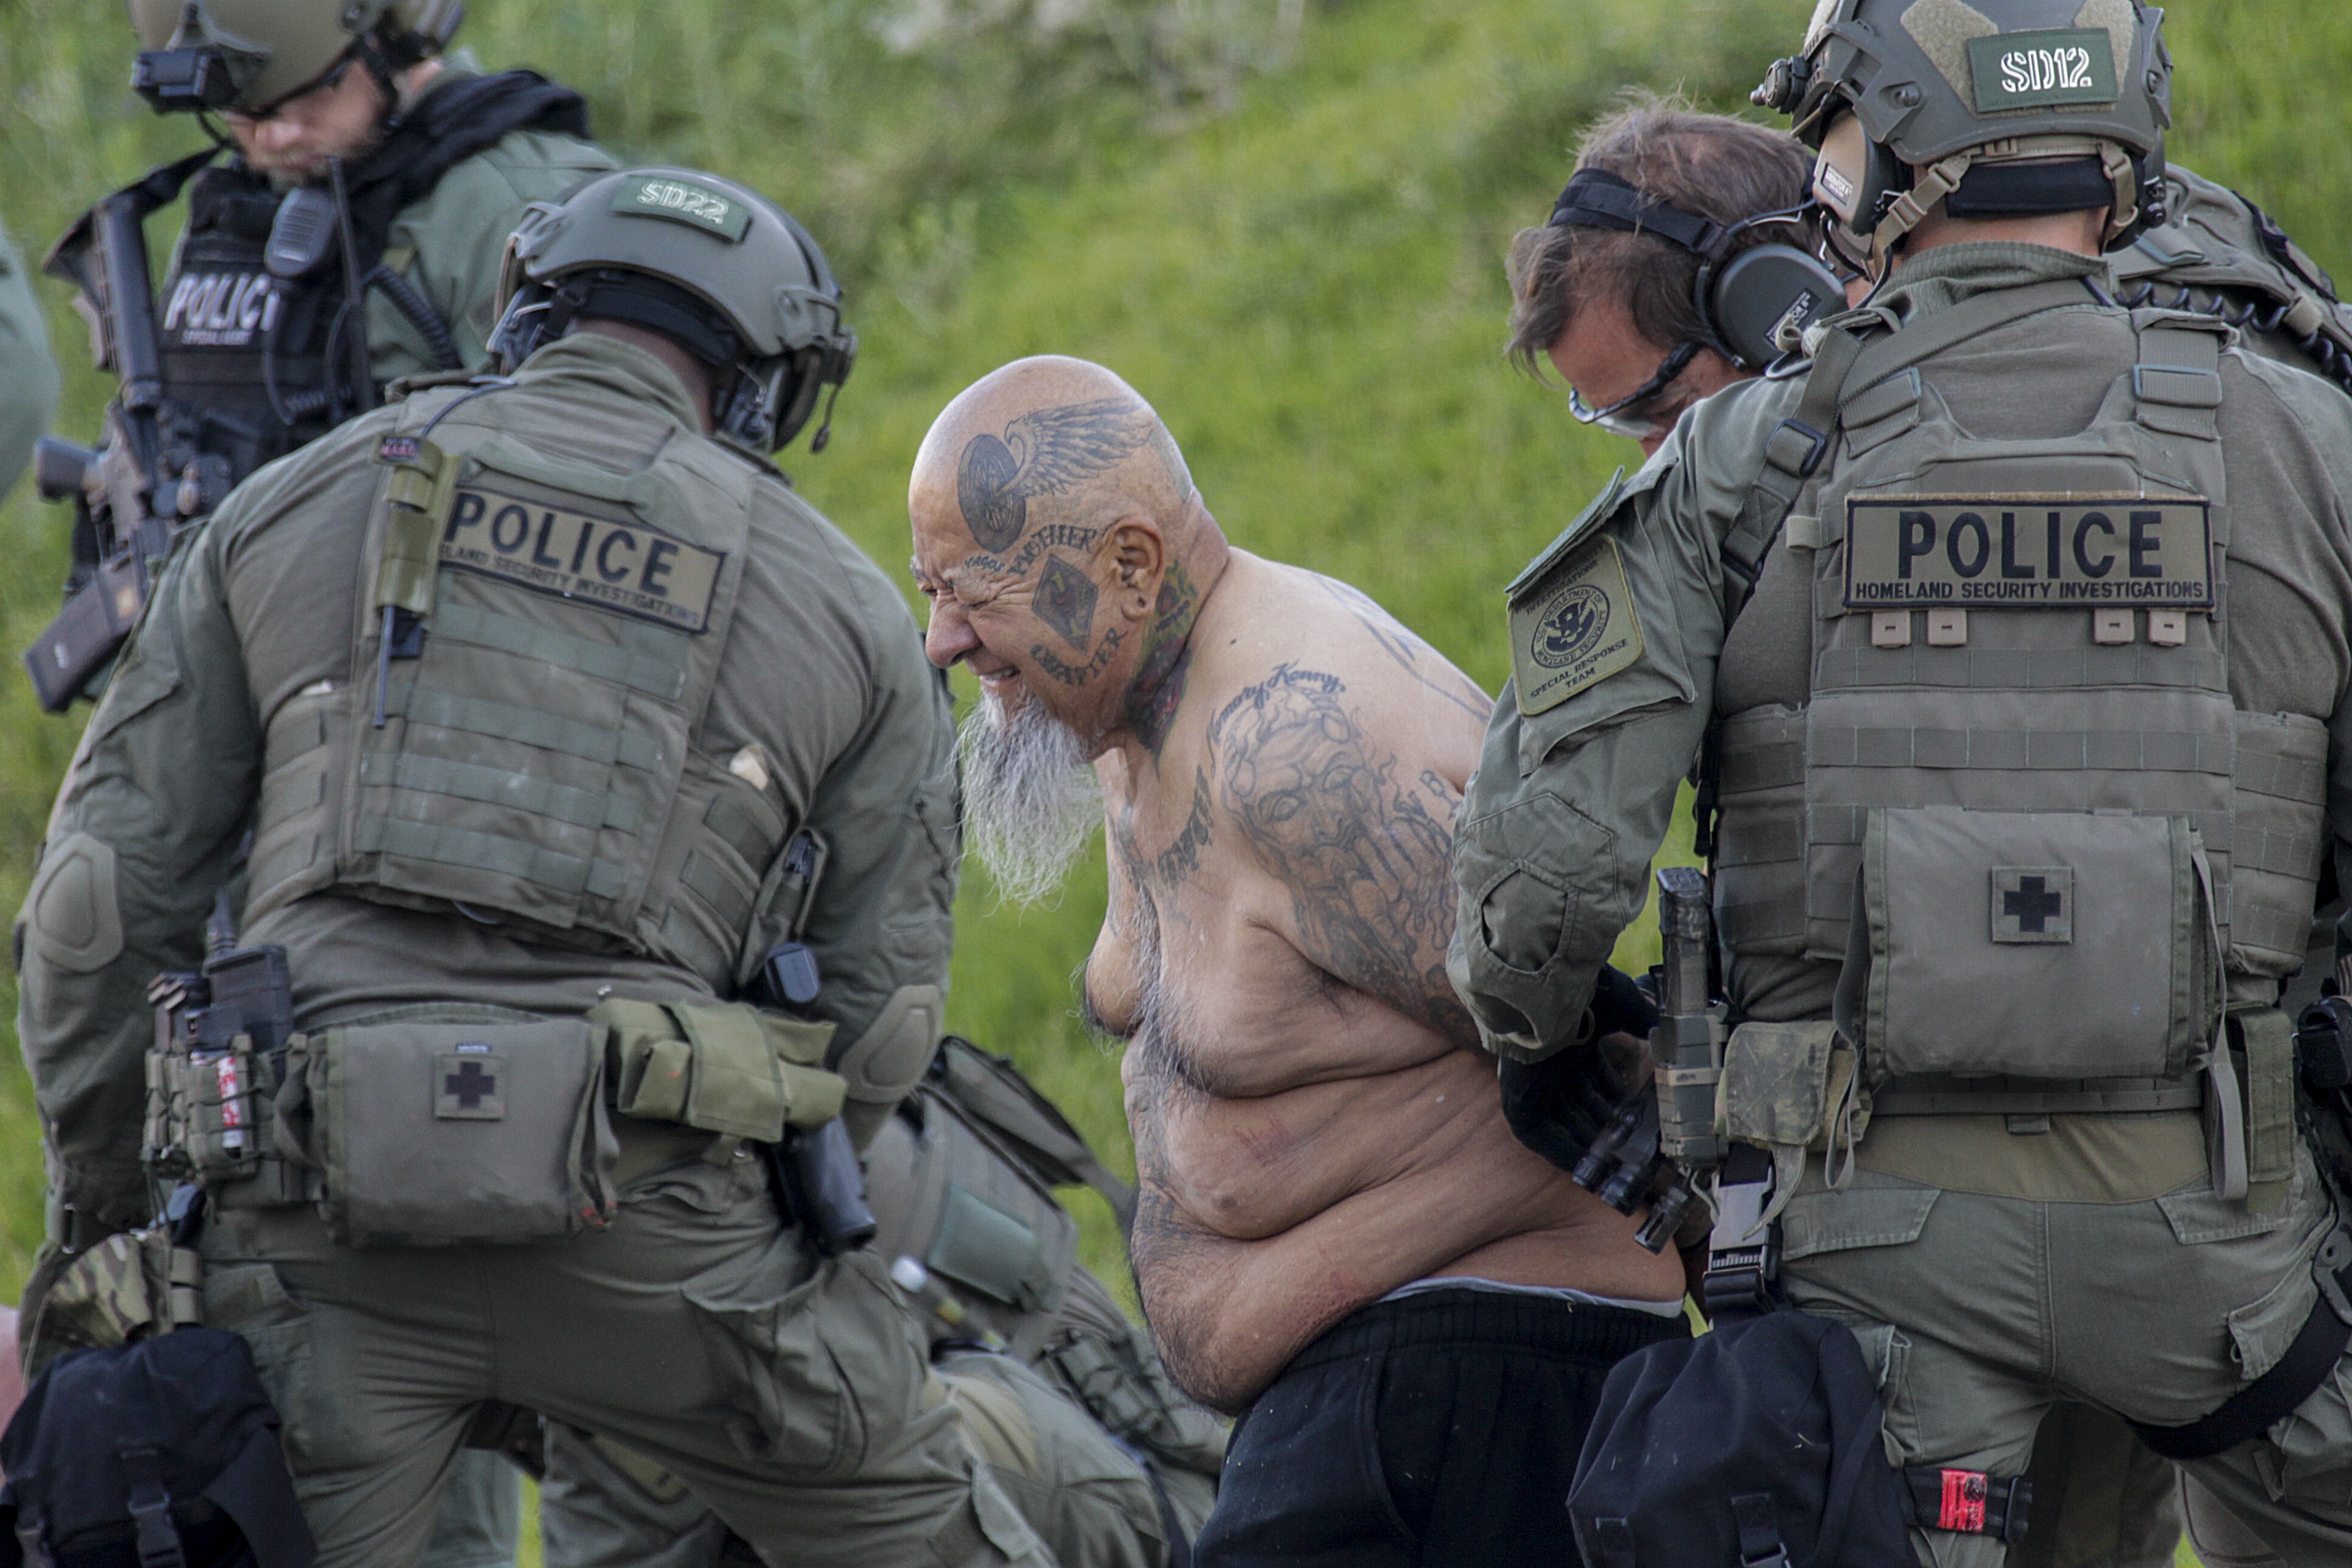 Federal agents arrest a person with Vagos motorcycle gang tattoos as a suspect in a 2011 murder of a rival gang leader. Early Friday morning June 16, 2017 federal agents detained many people after serving arrest and search warrants at home being operated as a rehab center, in Moreno Valley targeting a biker gang suspected of drug trafficking as well as murder.